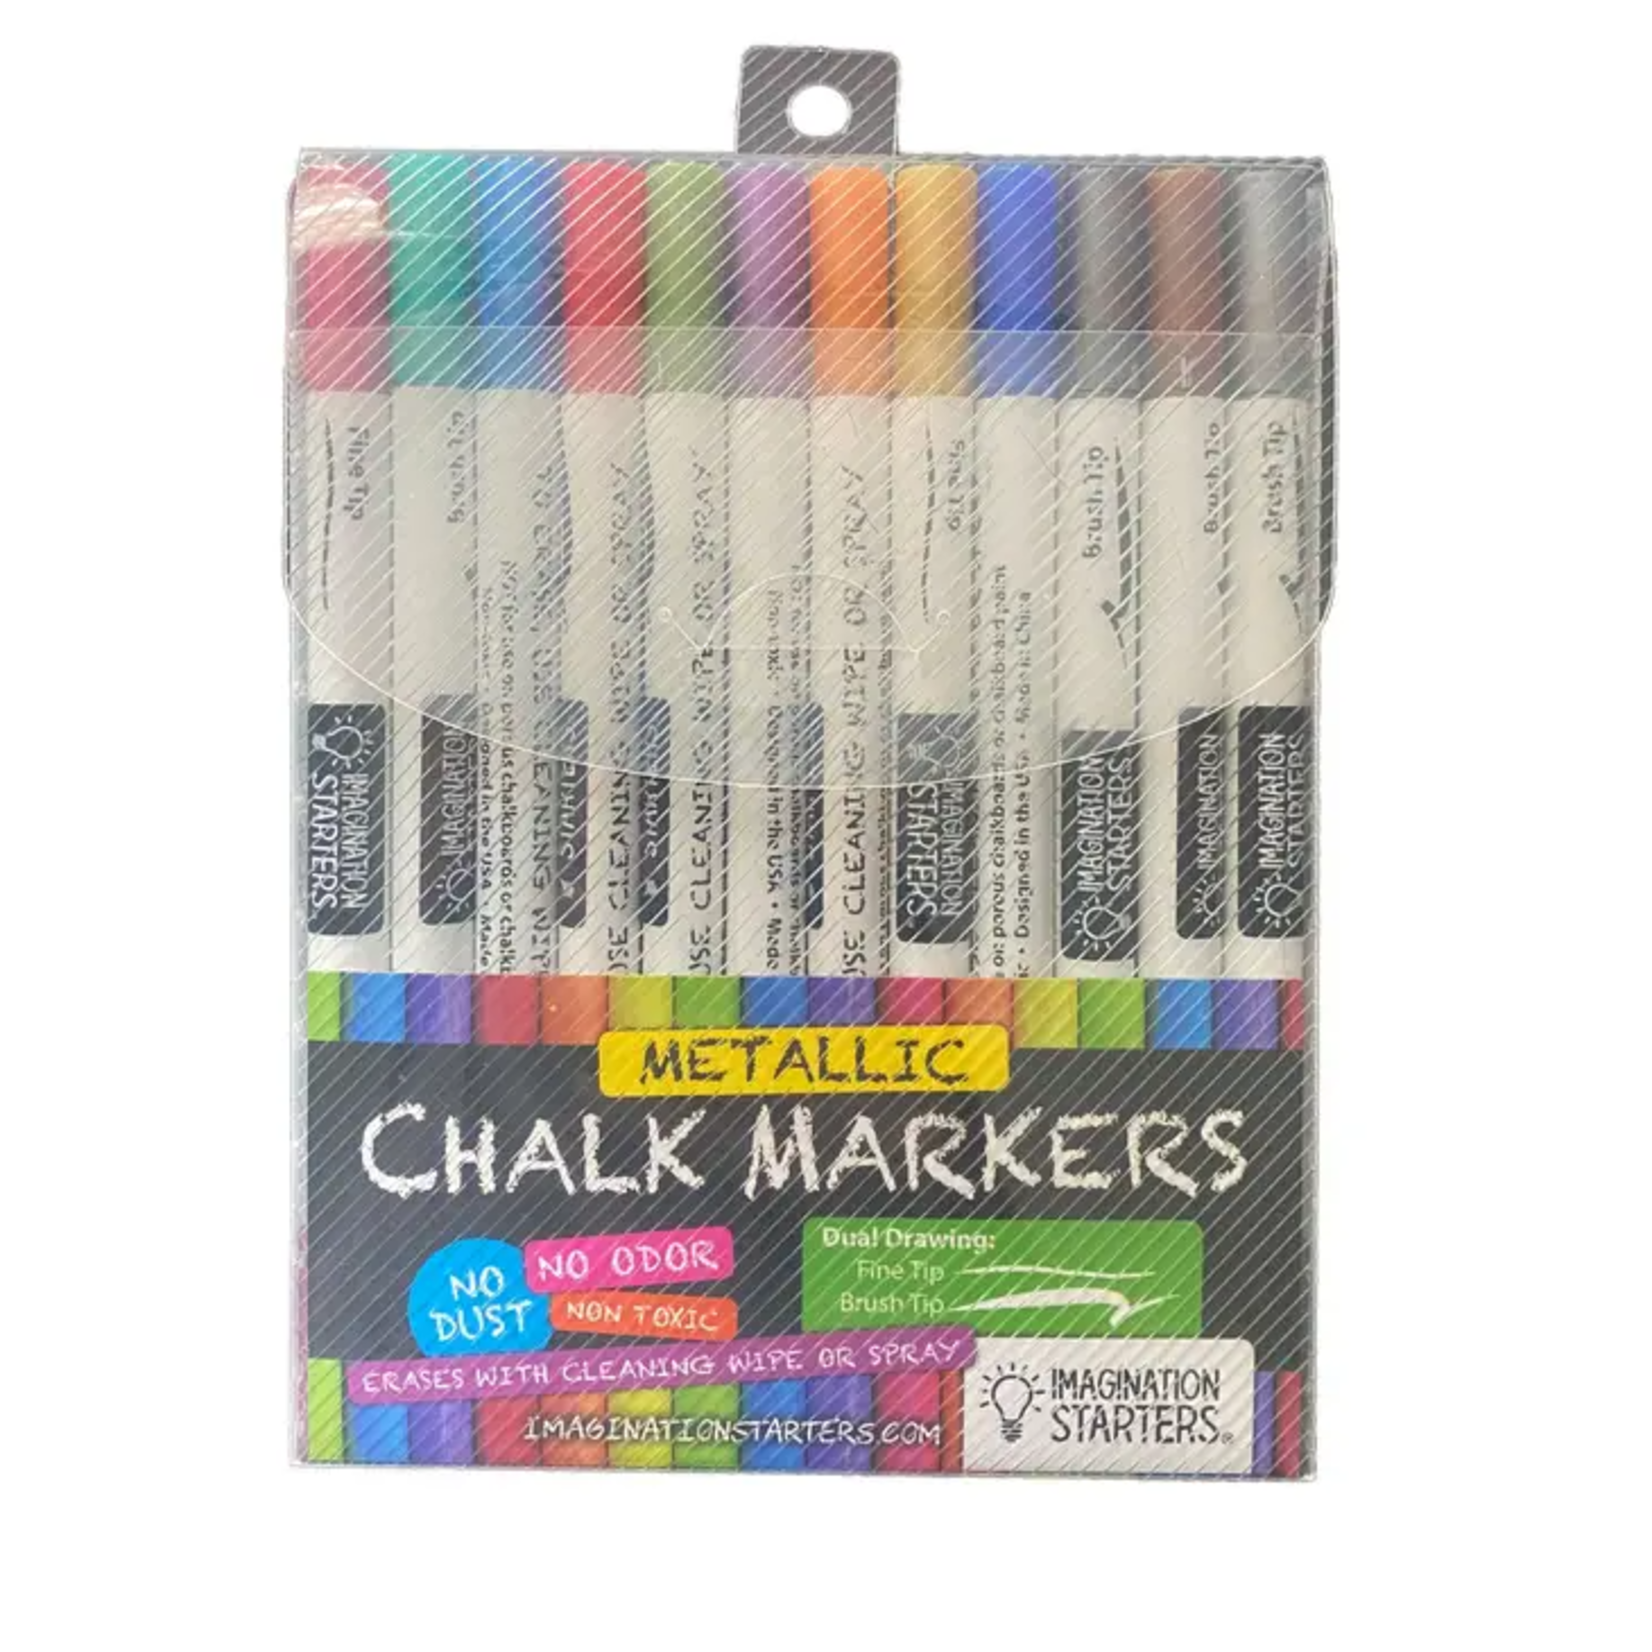 How to use Metallic Chalk Markers 